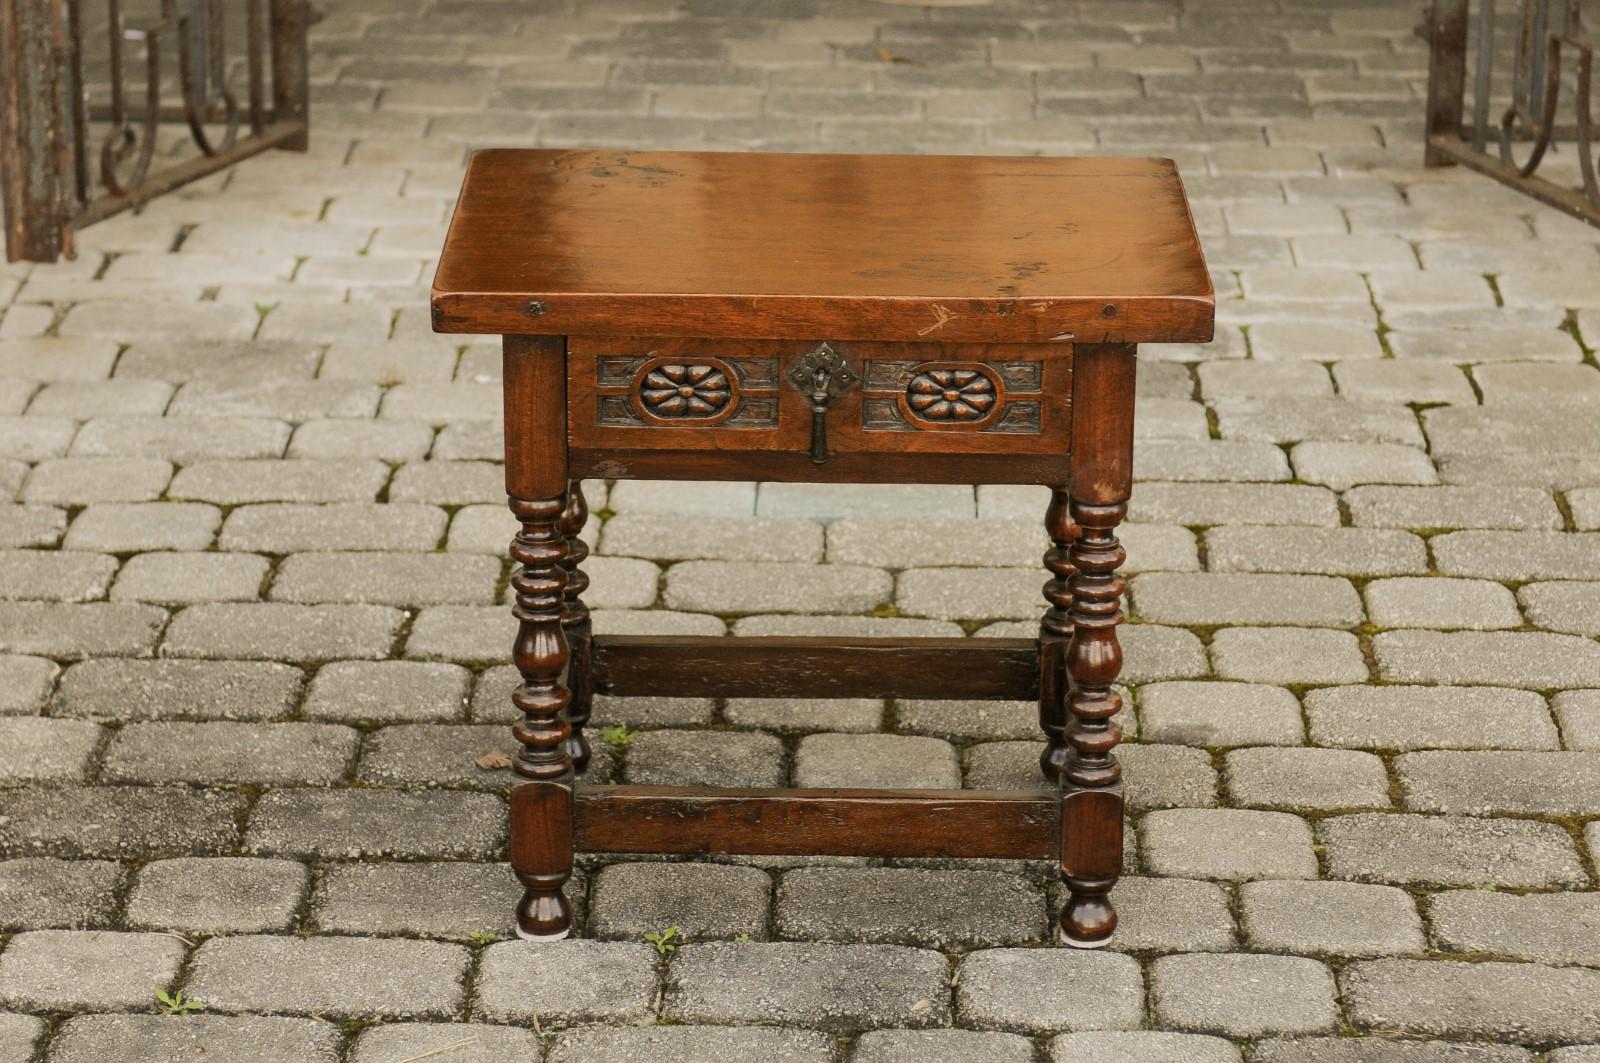 An Italian walnut side table from the early 20th century, with single drawer, floral décor and turned legs. Born in Italy during the early years of the 20th century, this lovely walnut side table features a rectangular top, sitting above a single